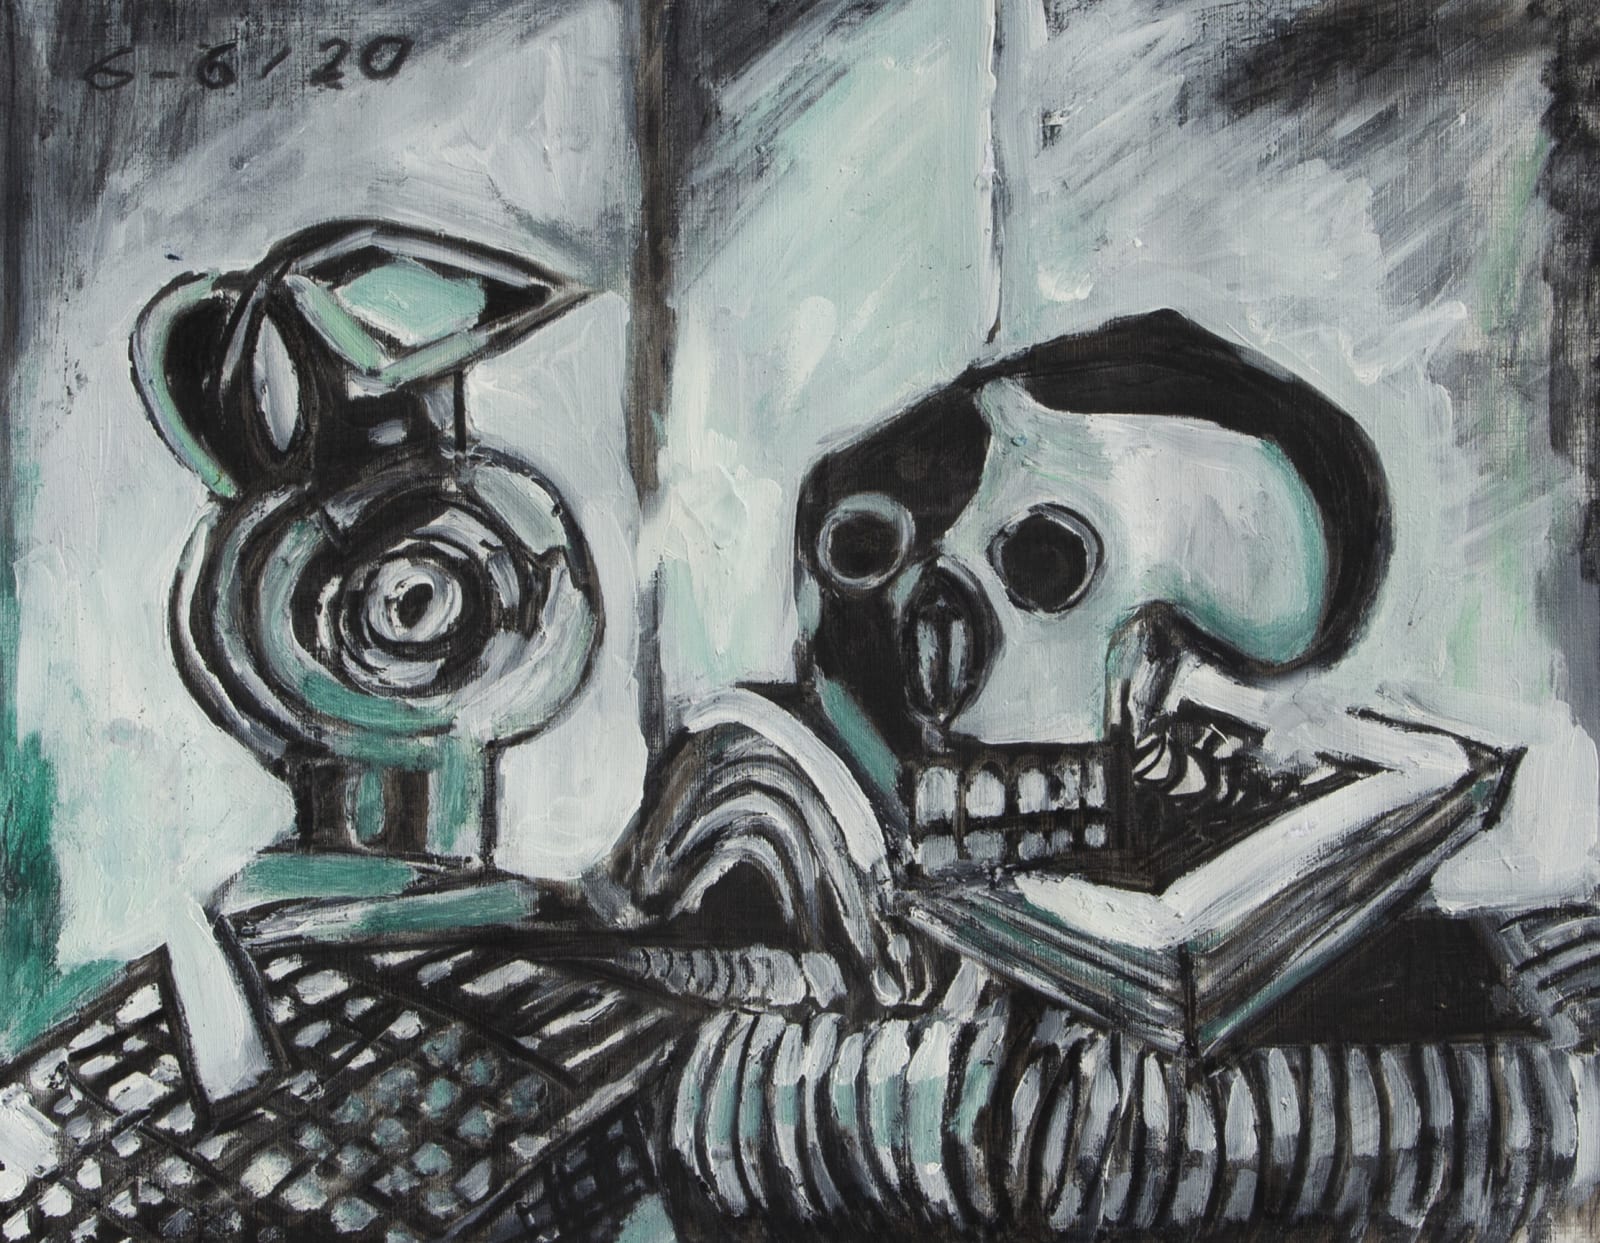 RICHARD GOWER, In The Manner Of Picasso, Skull, Jug & Book